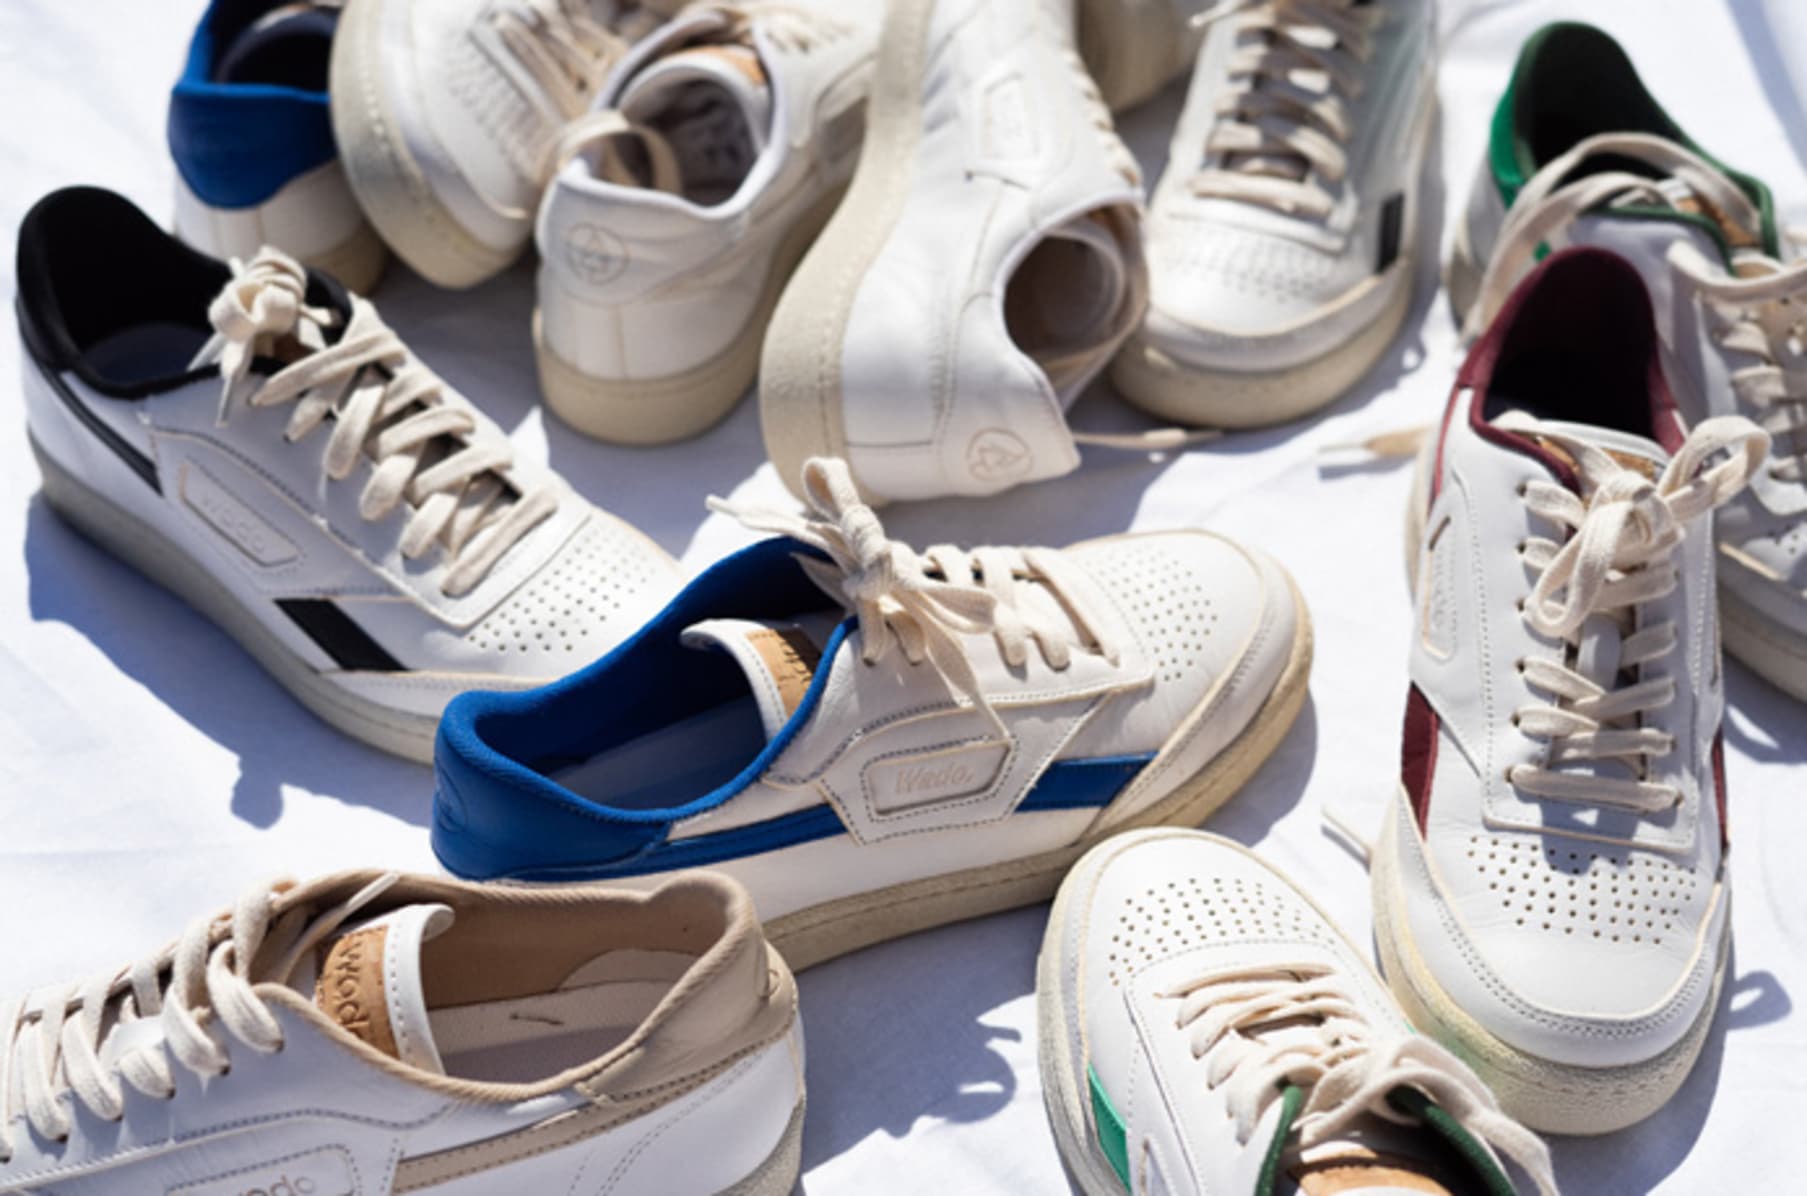 Vlucht Achtervoegsel pen Wado. Gamechanging Sneakers inspired by the 80s. | Indiegogo